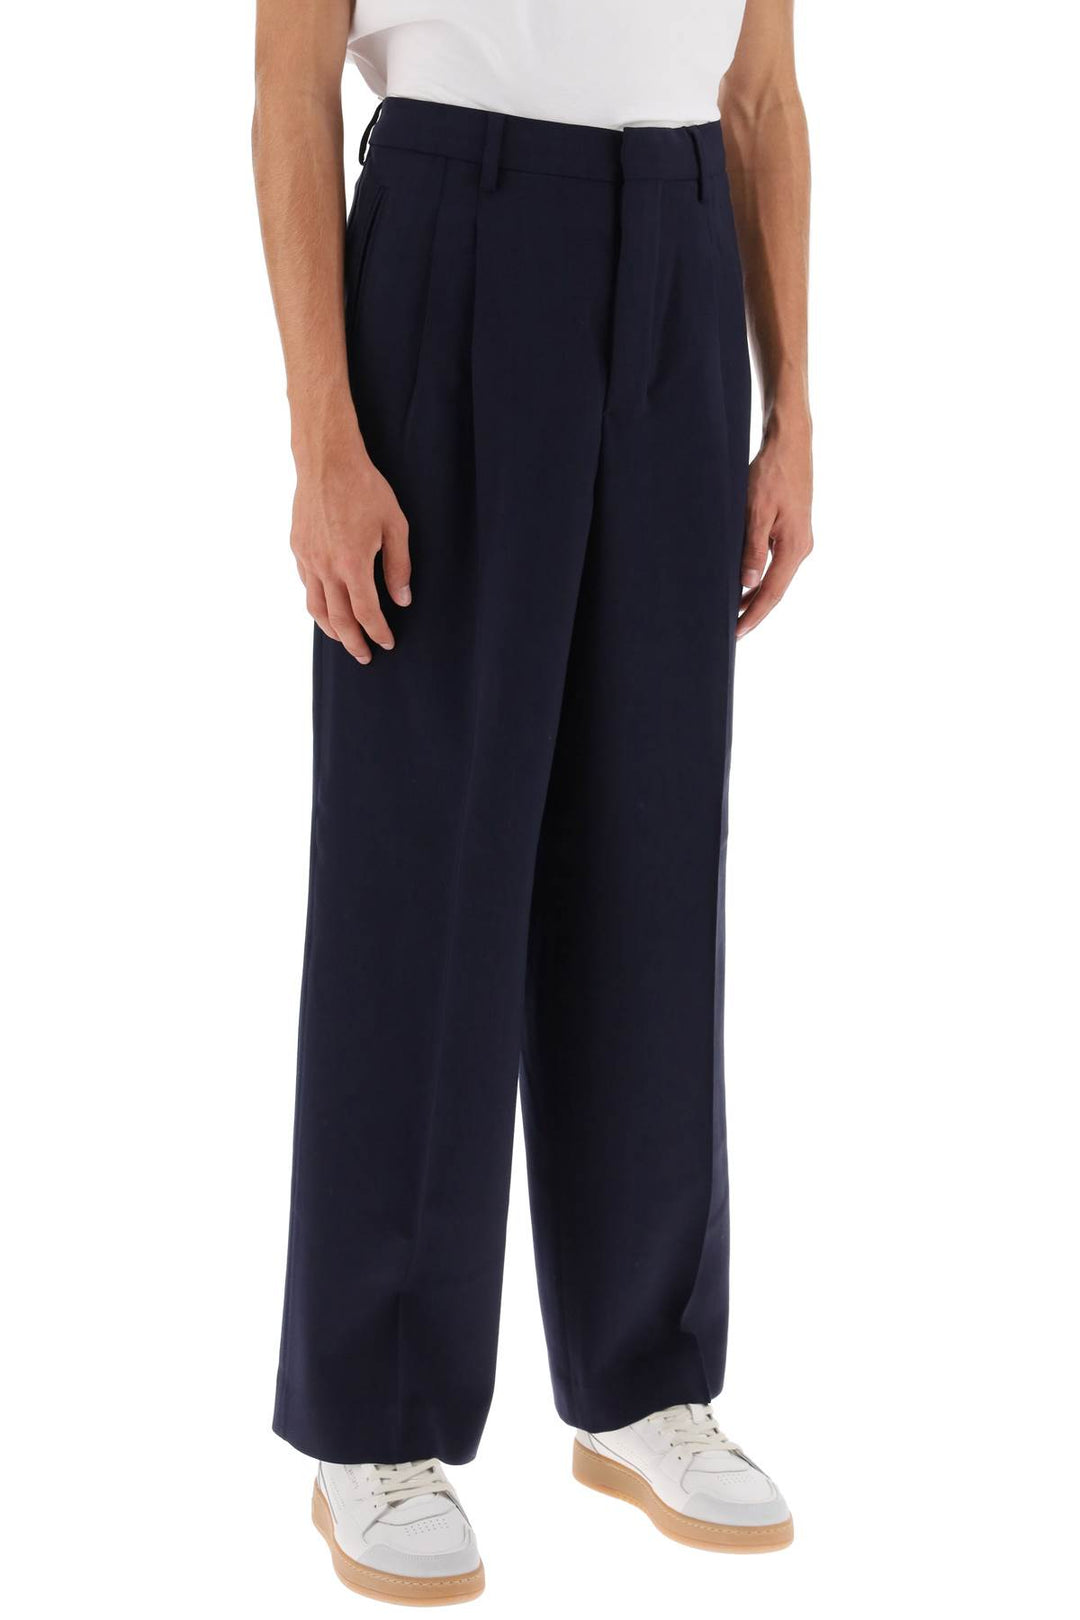 Ami Alexandre Matiussi Loose Fit Pants With Straight Cut   Blu